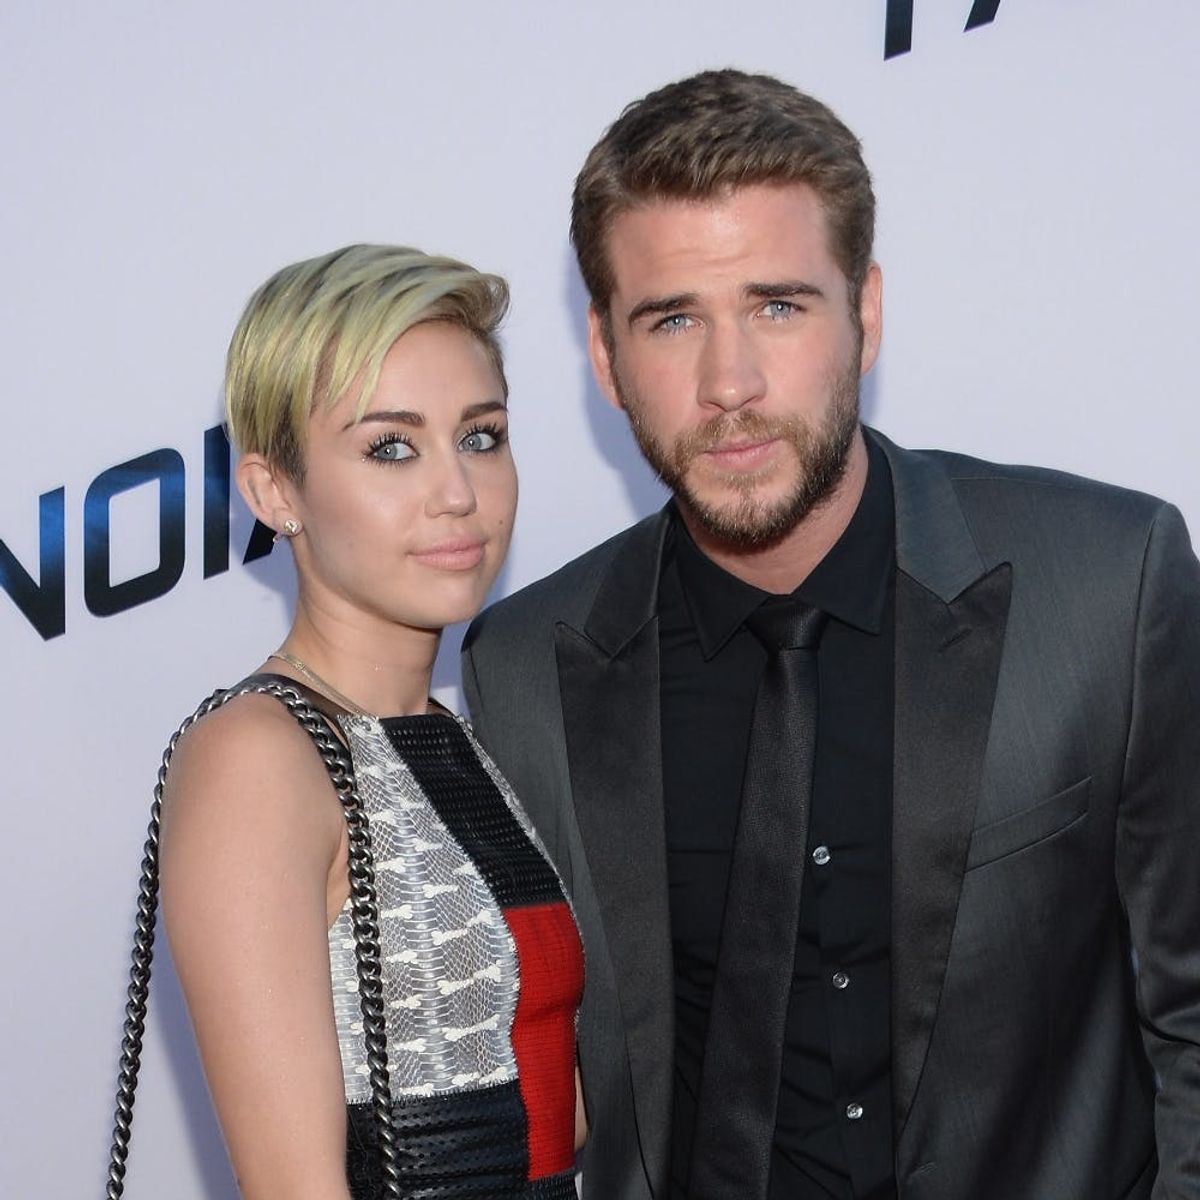 Miley Cyrus and Liam Hemsworth Have an Adorable Nickname for Themselves